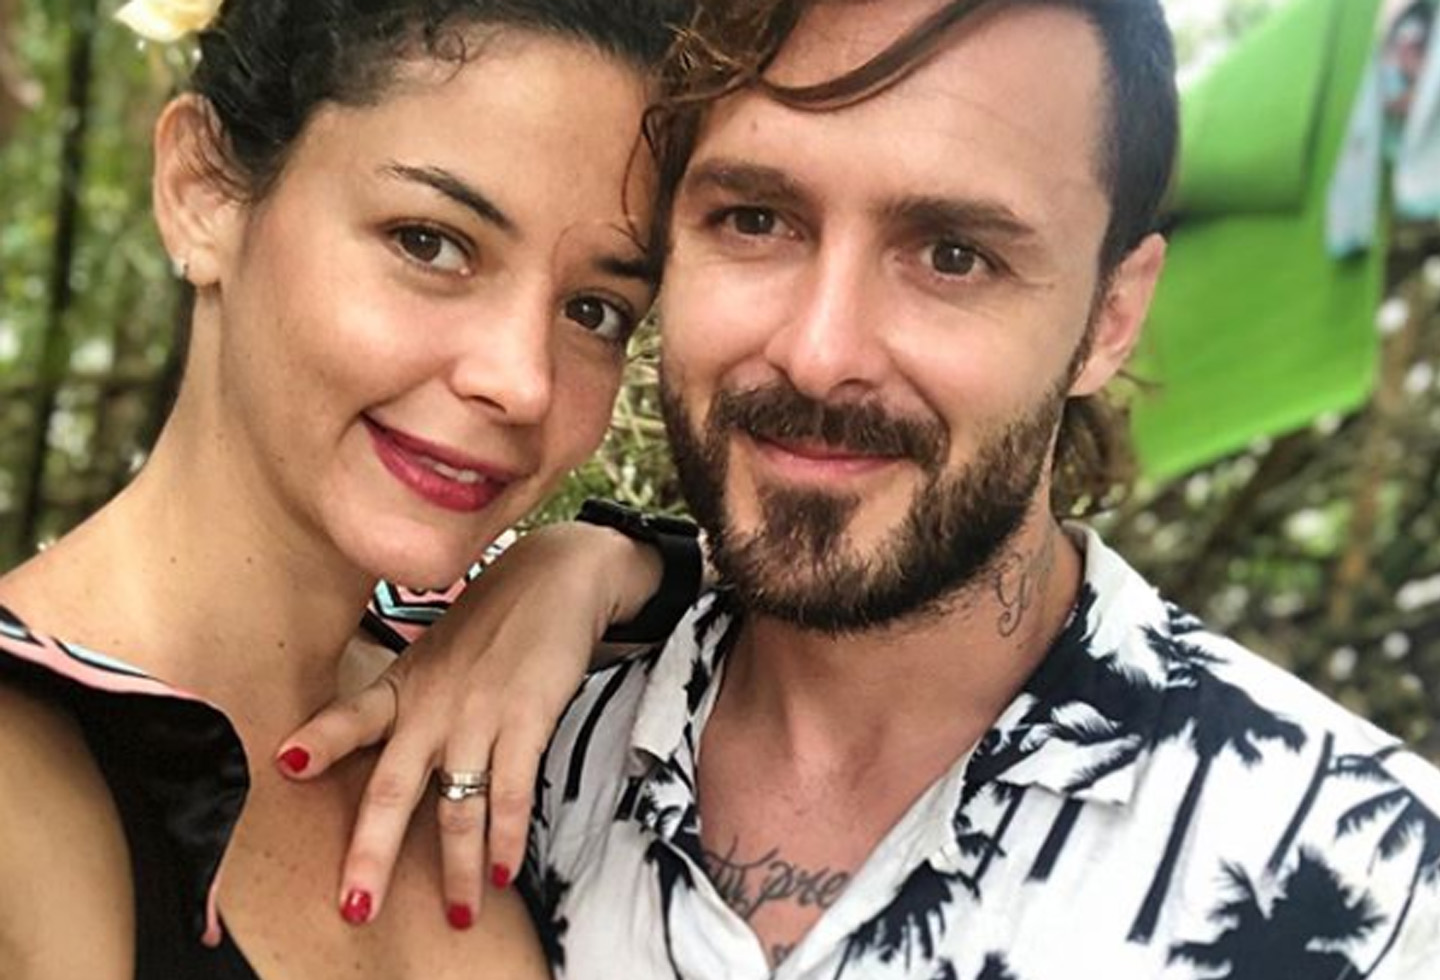 Tatán Mejía and Maleja Restrepo are making their debut: they put their fingerprints on their new house